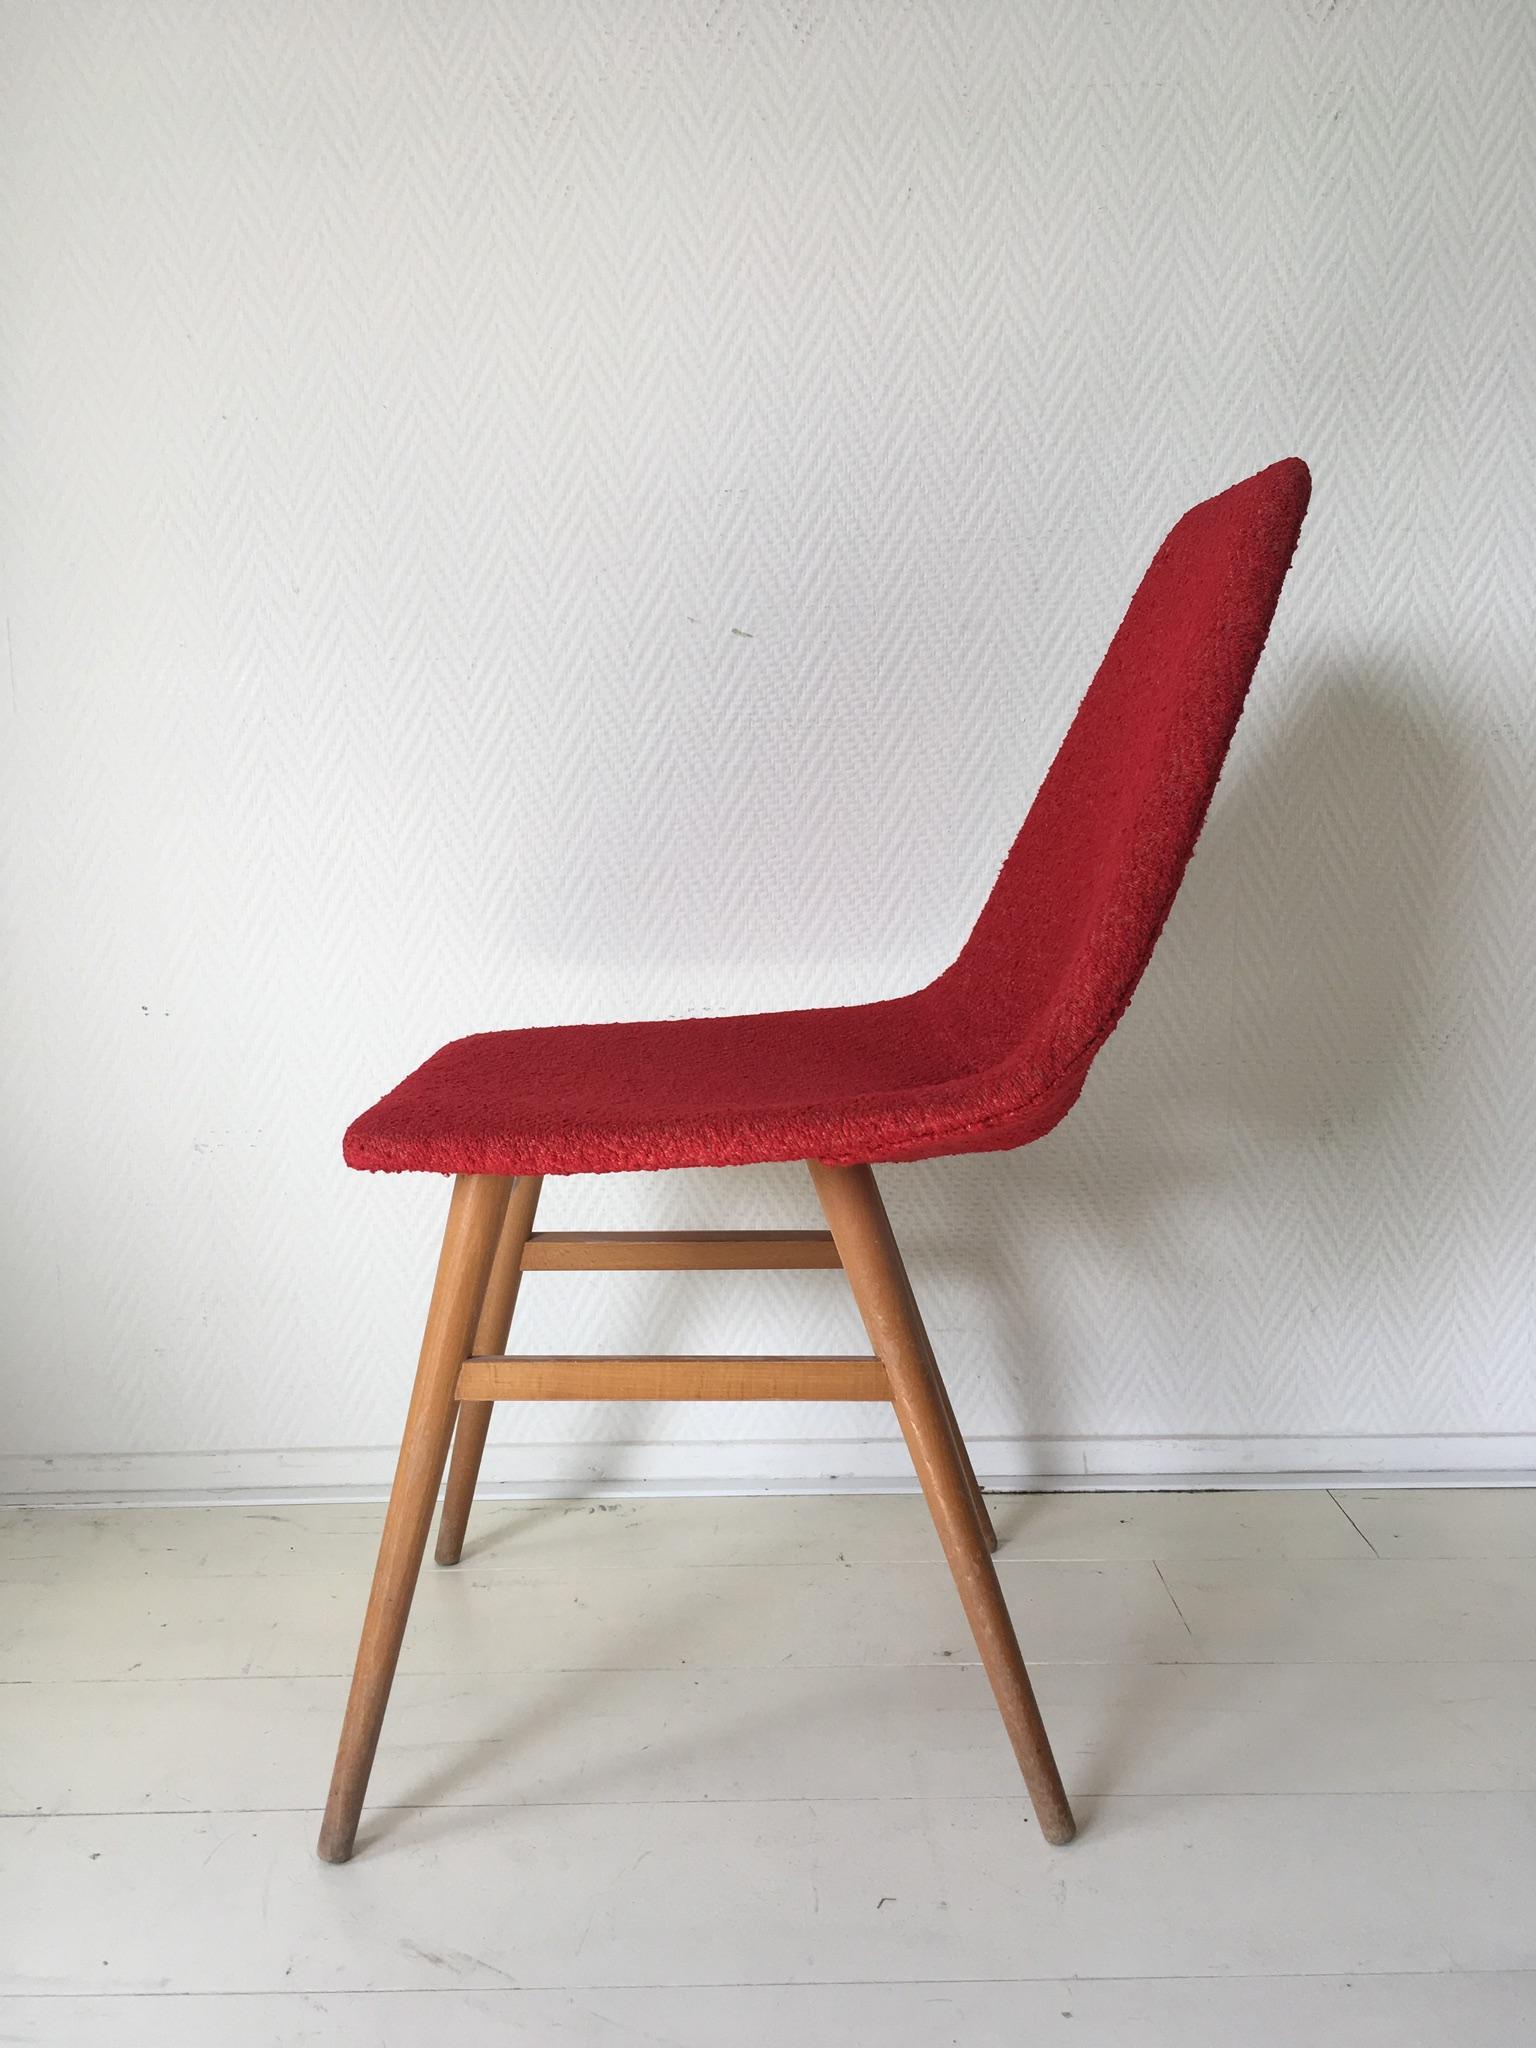 20th Century Midcentury Hungarian Chairs, Side Chairs by Judit Burian and Erika Szek, 1950s For Sale